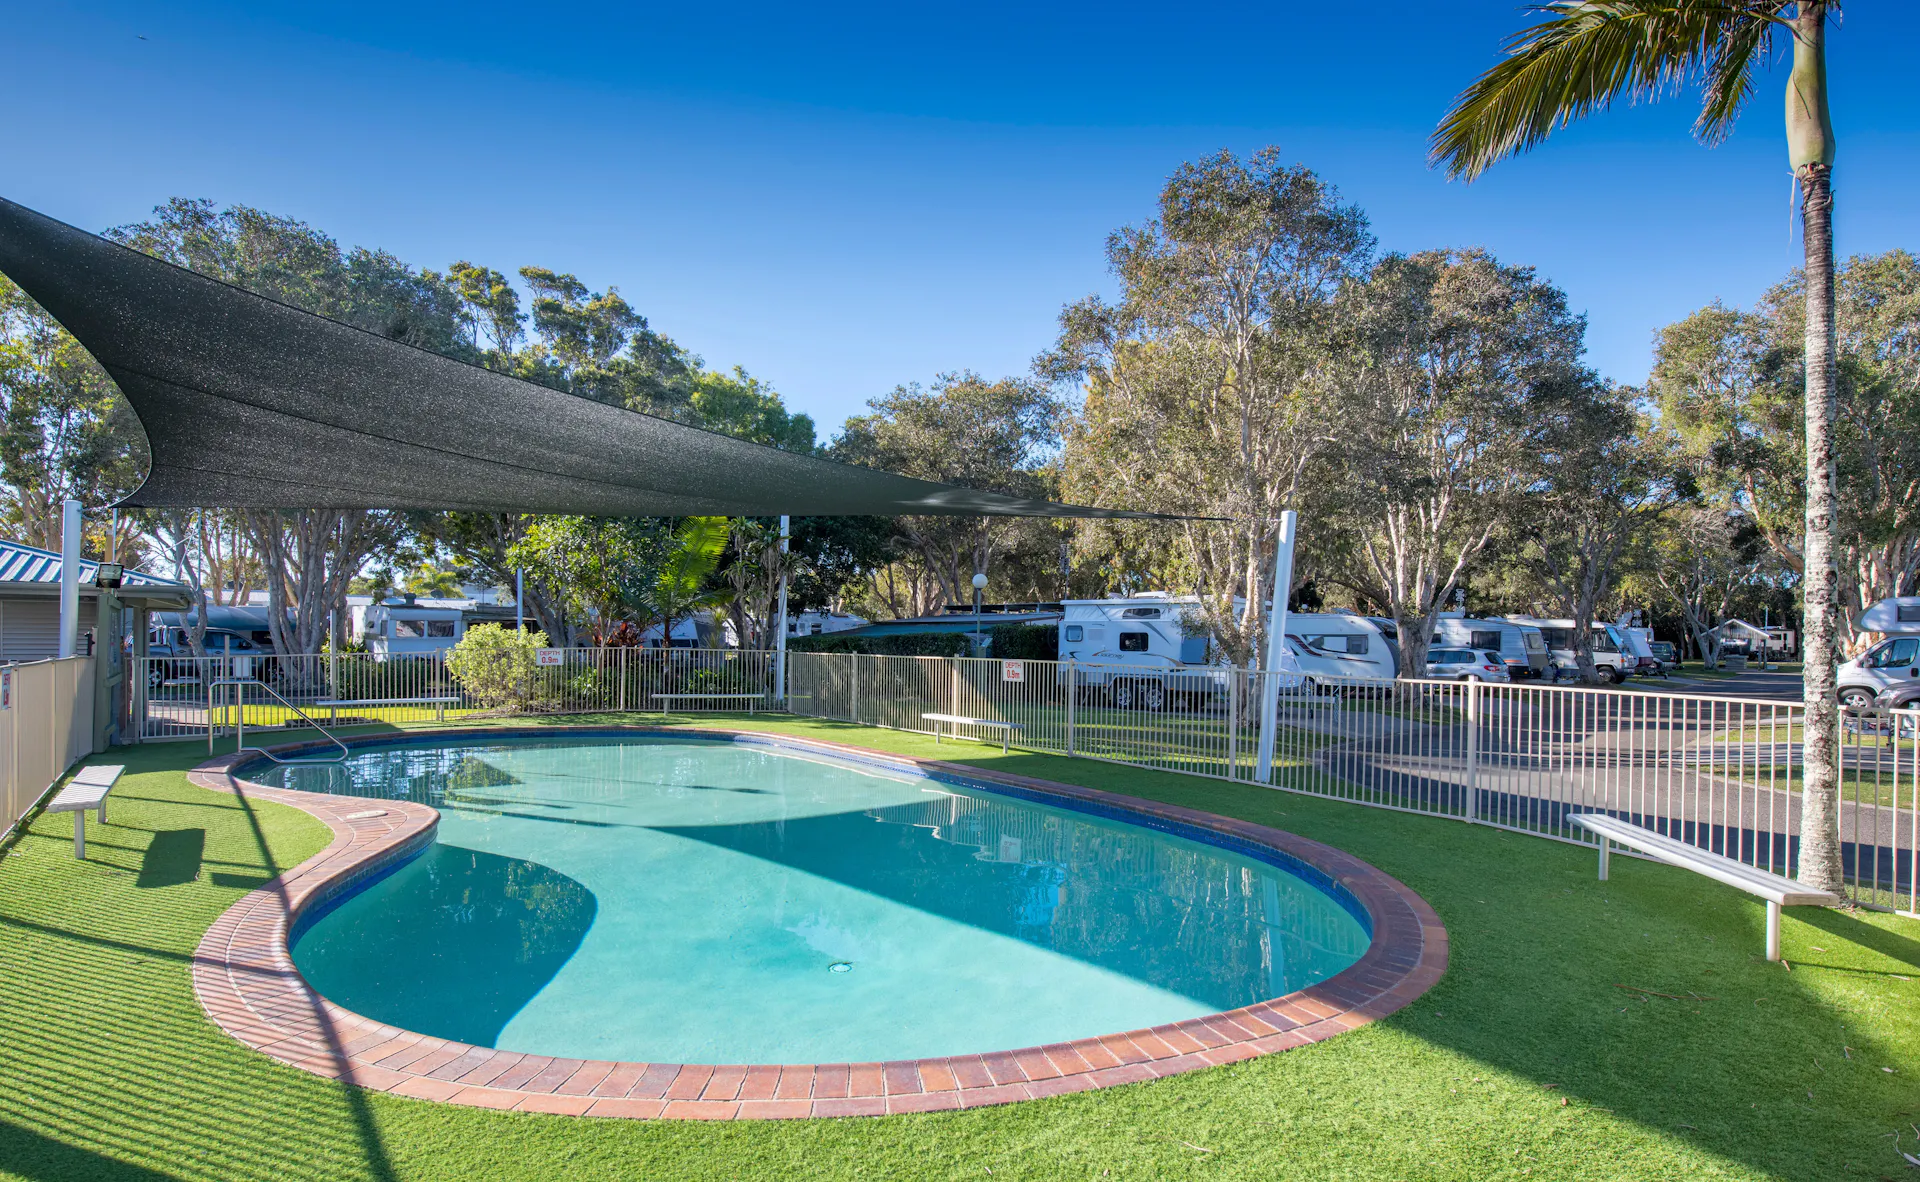 Shot of Mudjimba Beach Holiday Park swimming pool with no one swimming. Surrounded by trees and sun